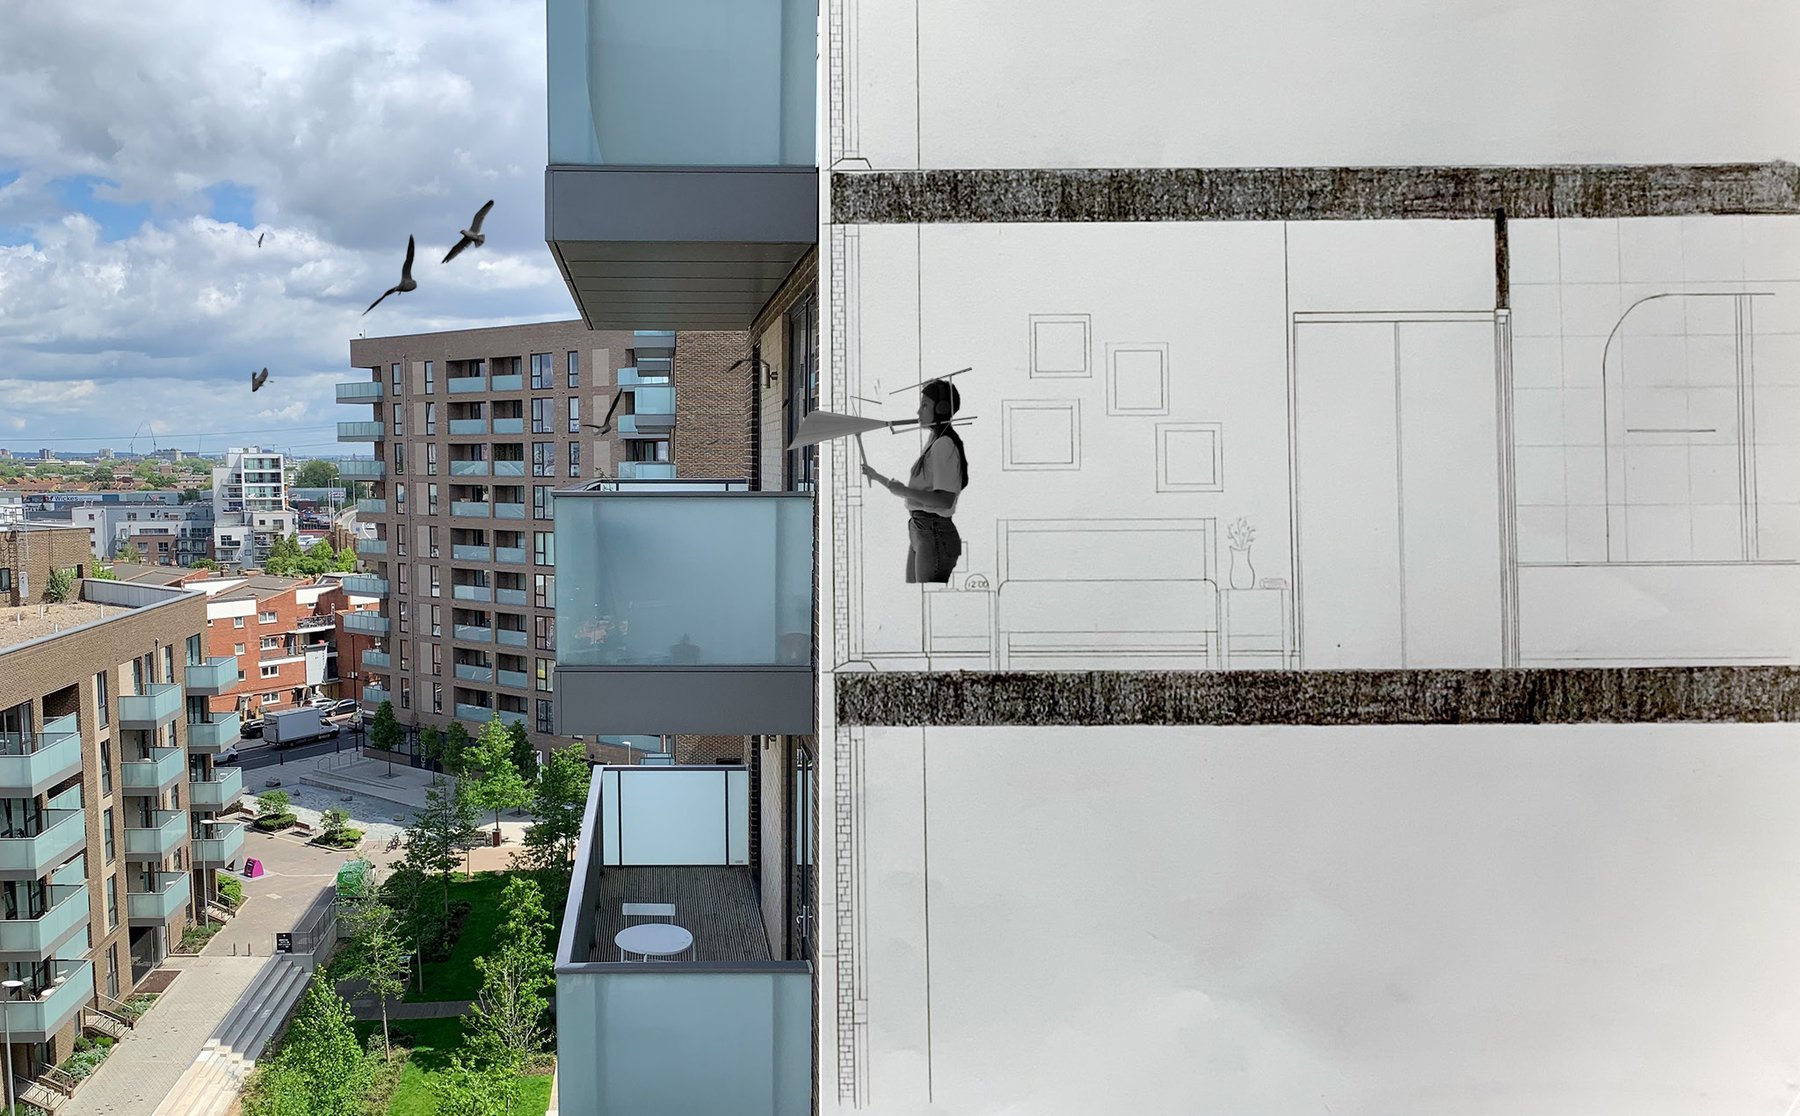 This is a composite drawing, made out of a pencil drawn section through a multi-story building and collaged photographs of the outside. A person is seen inside of one of the sectioned appartments